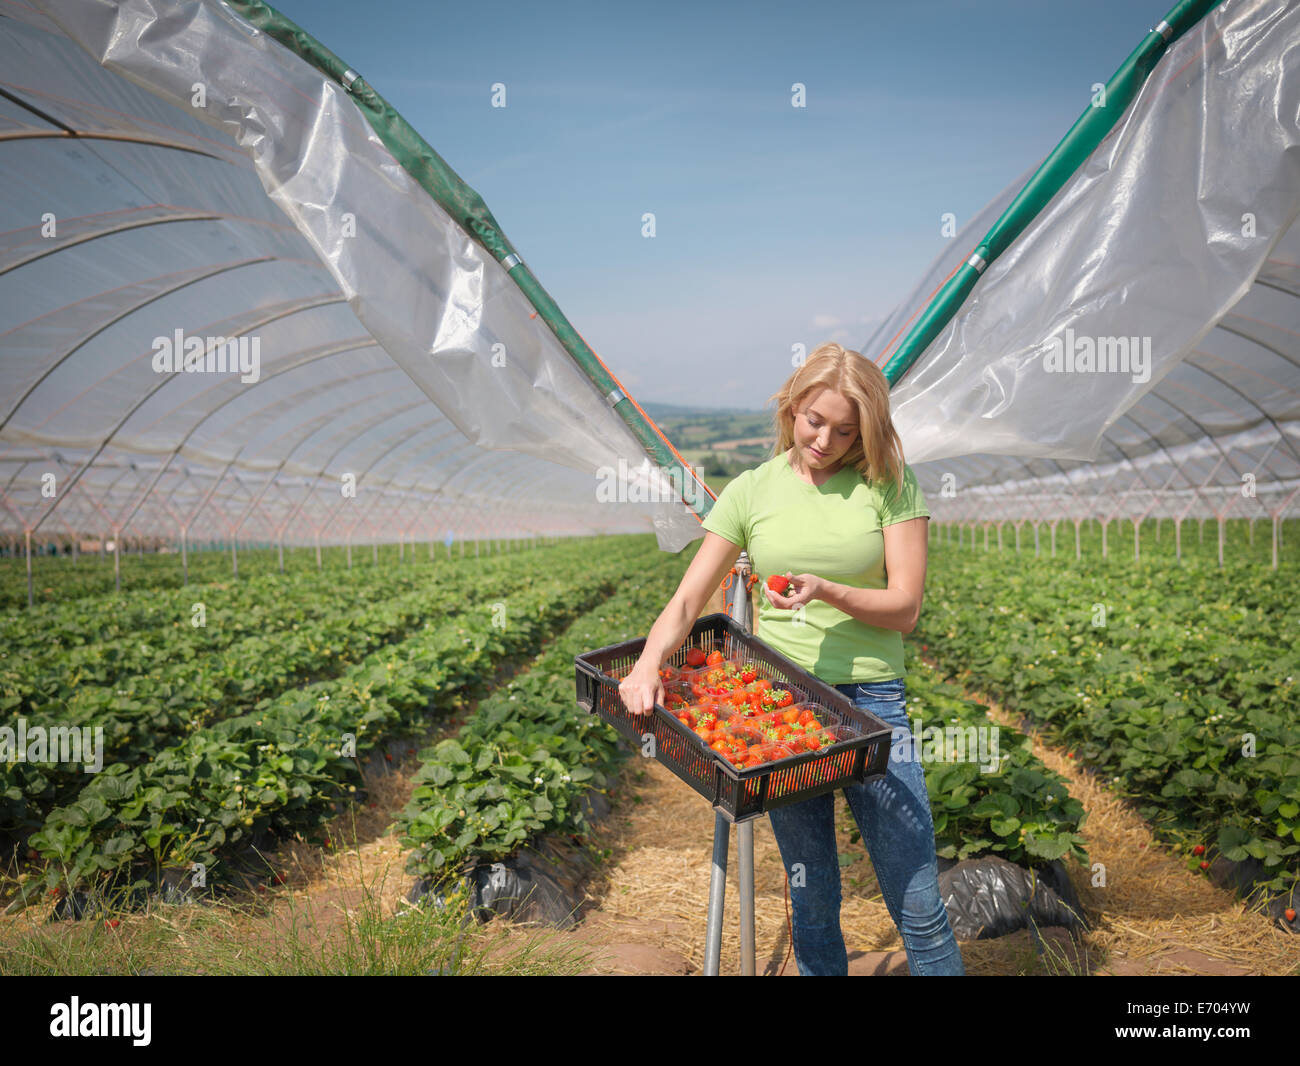 Worker checking strawberries on fruit farm Stock Photo